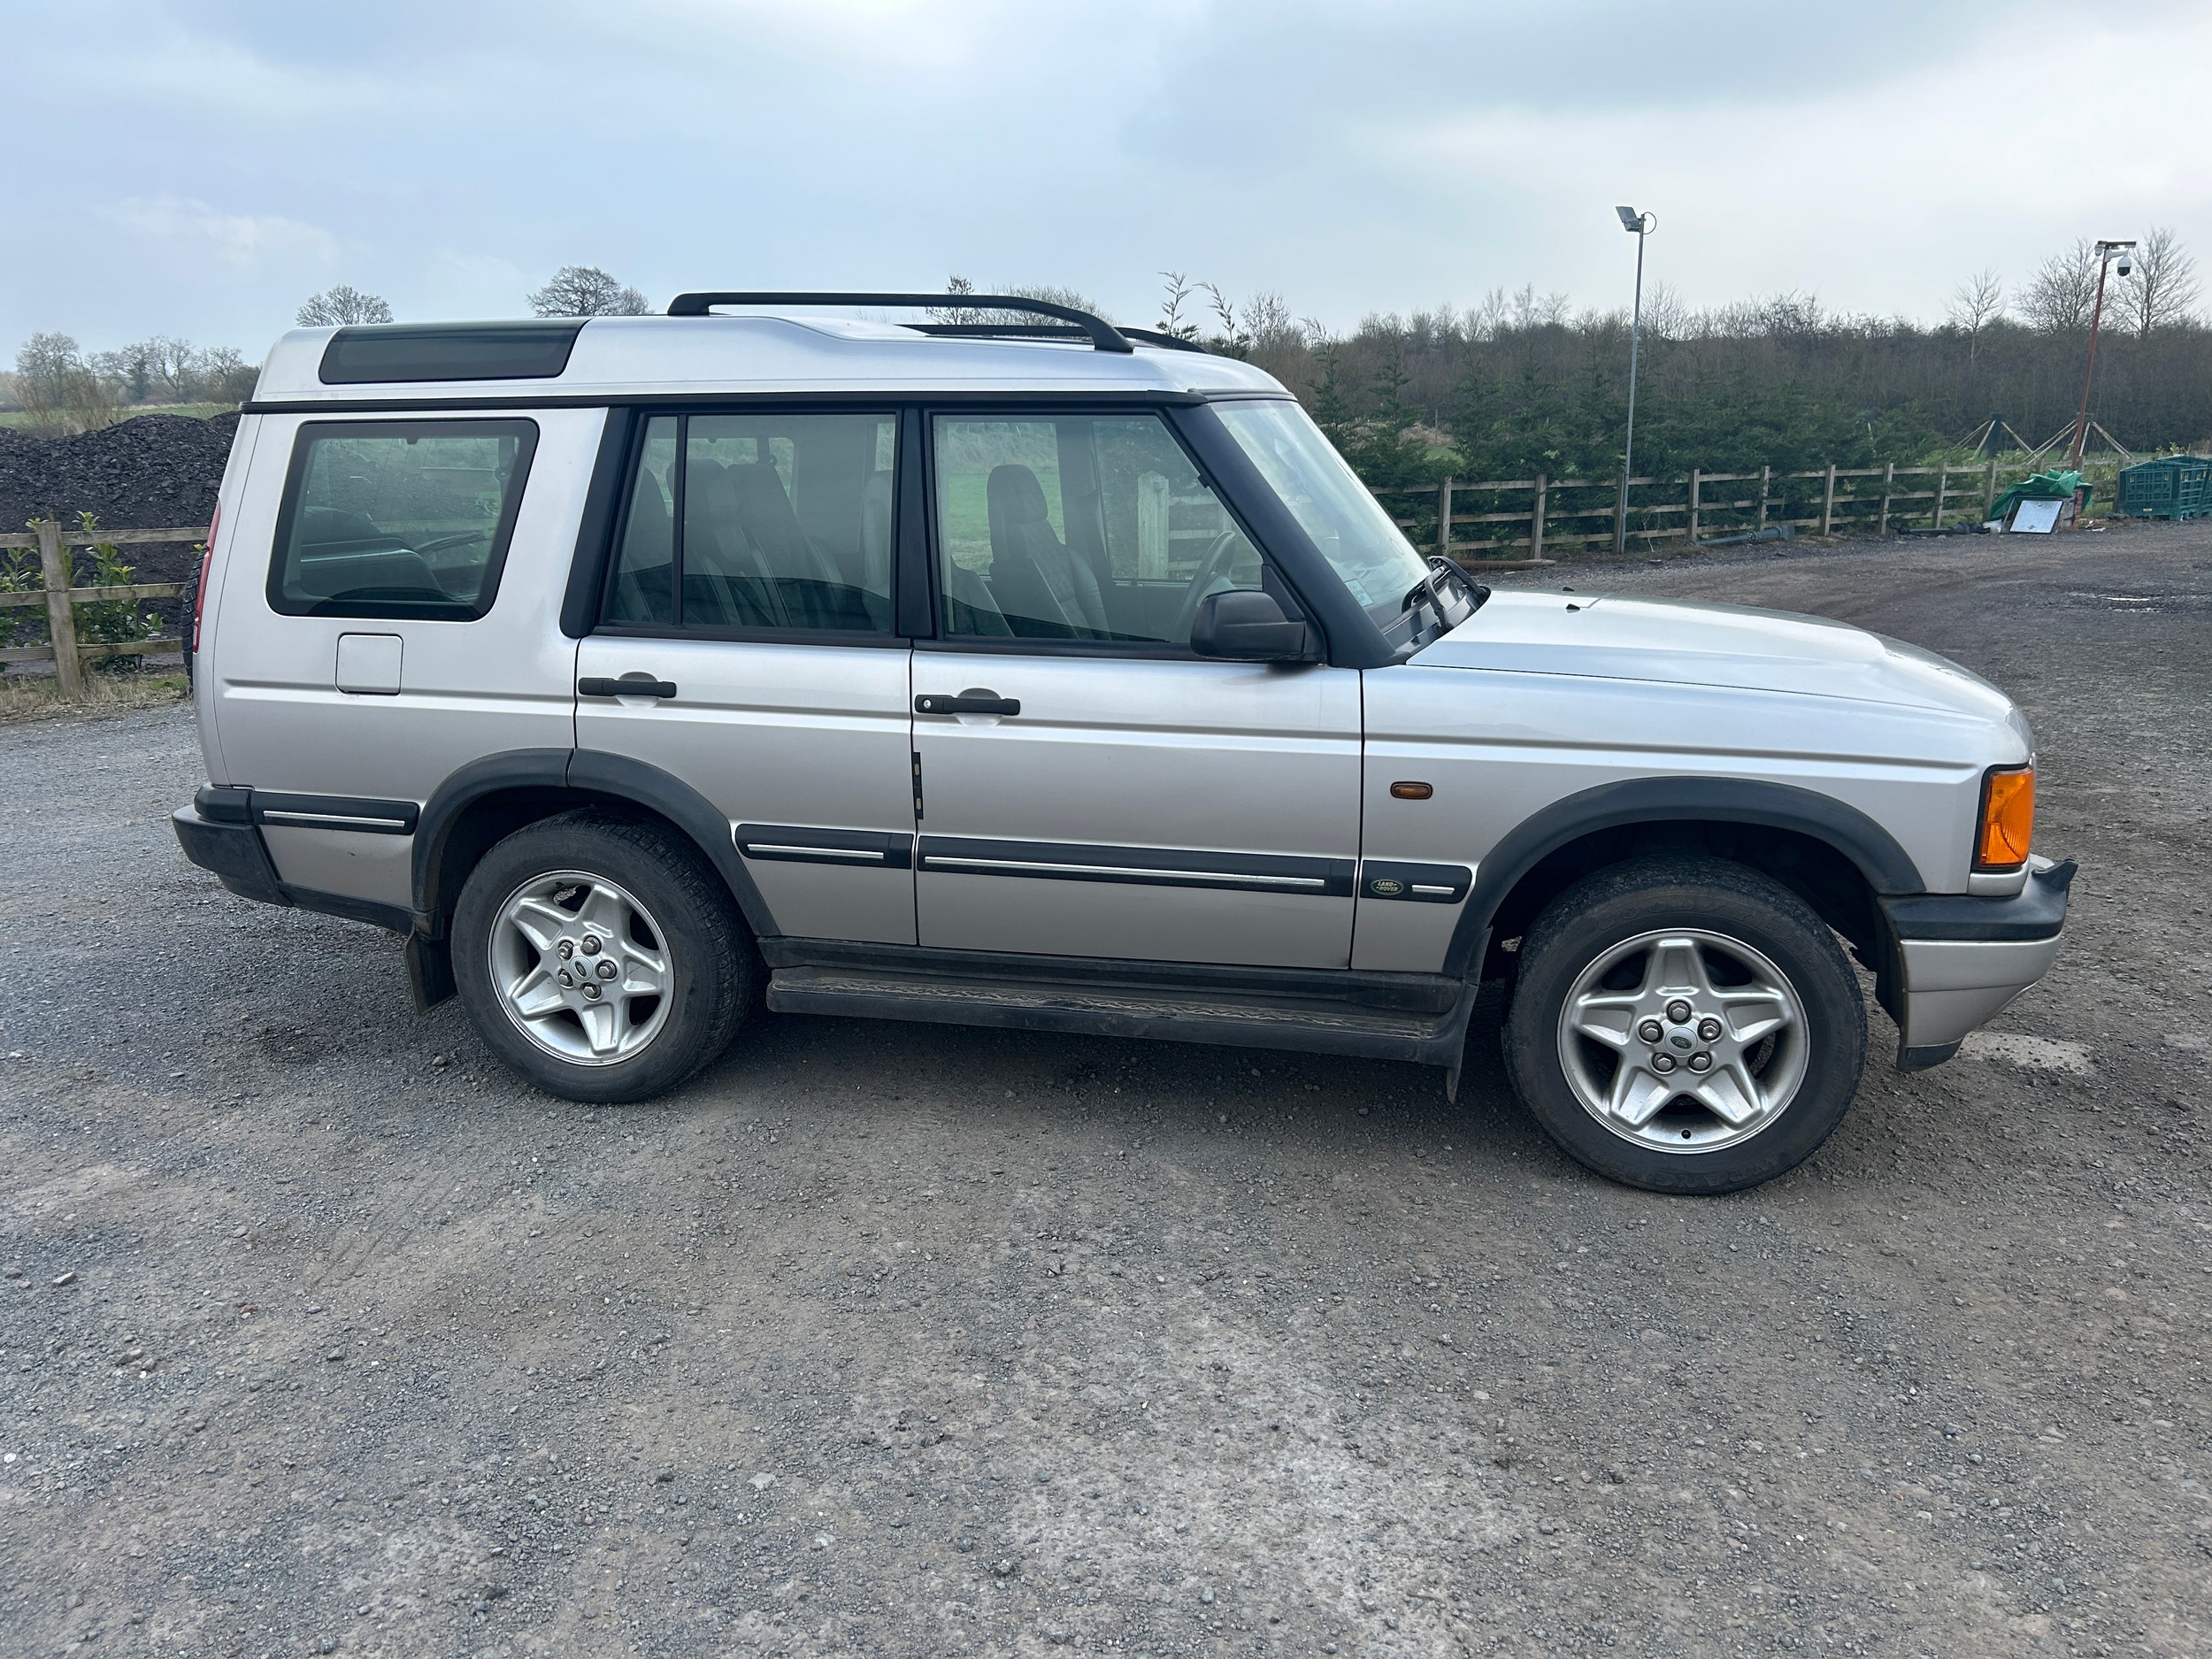 Land rover discovery 1999 model TD5 XS, colour silver, mileage 143,498 miles, reg T25WEN - 12 months